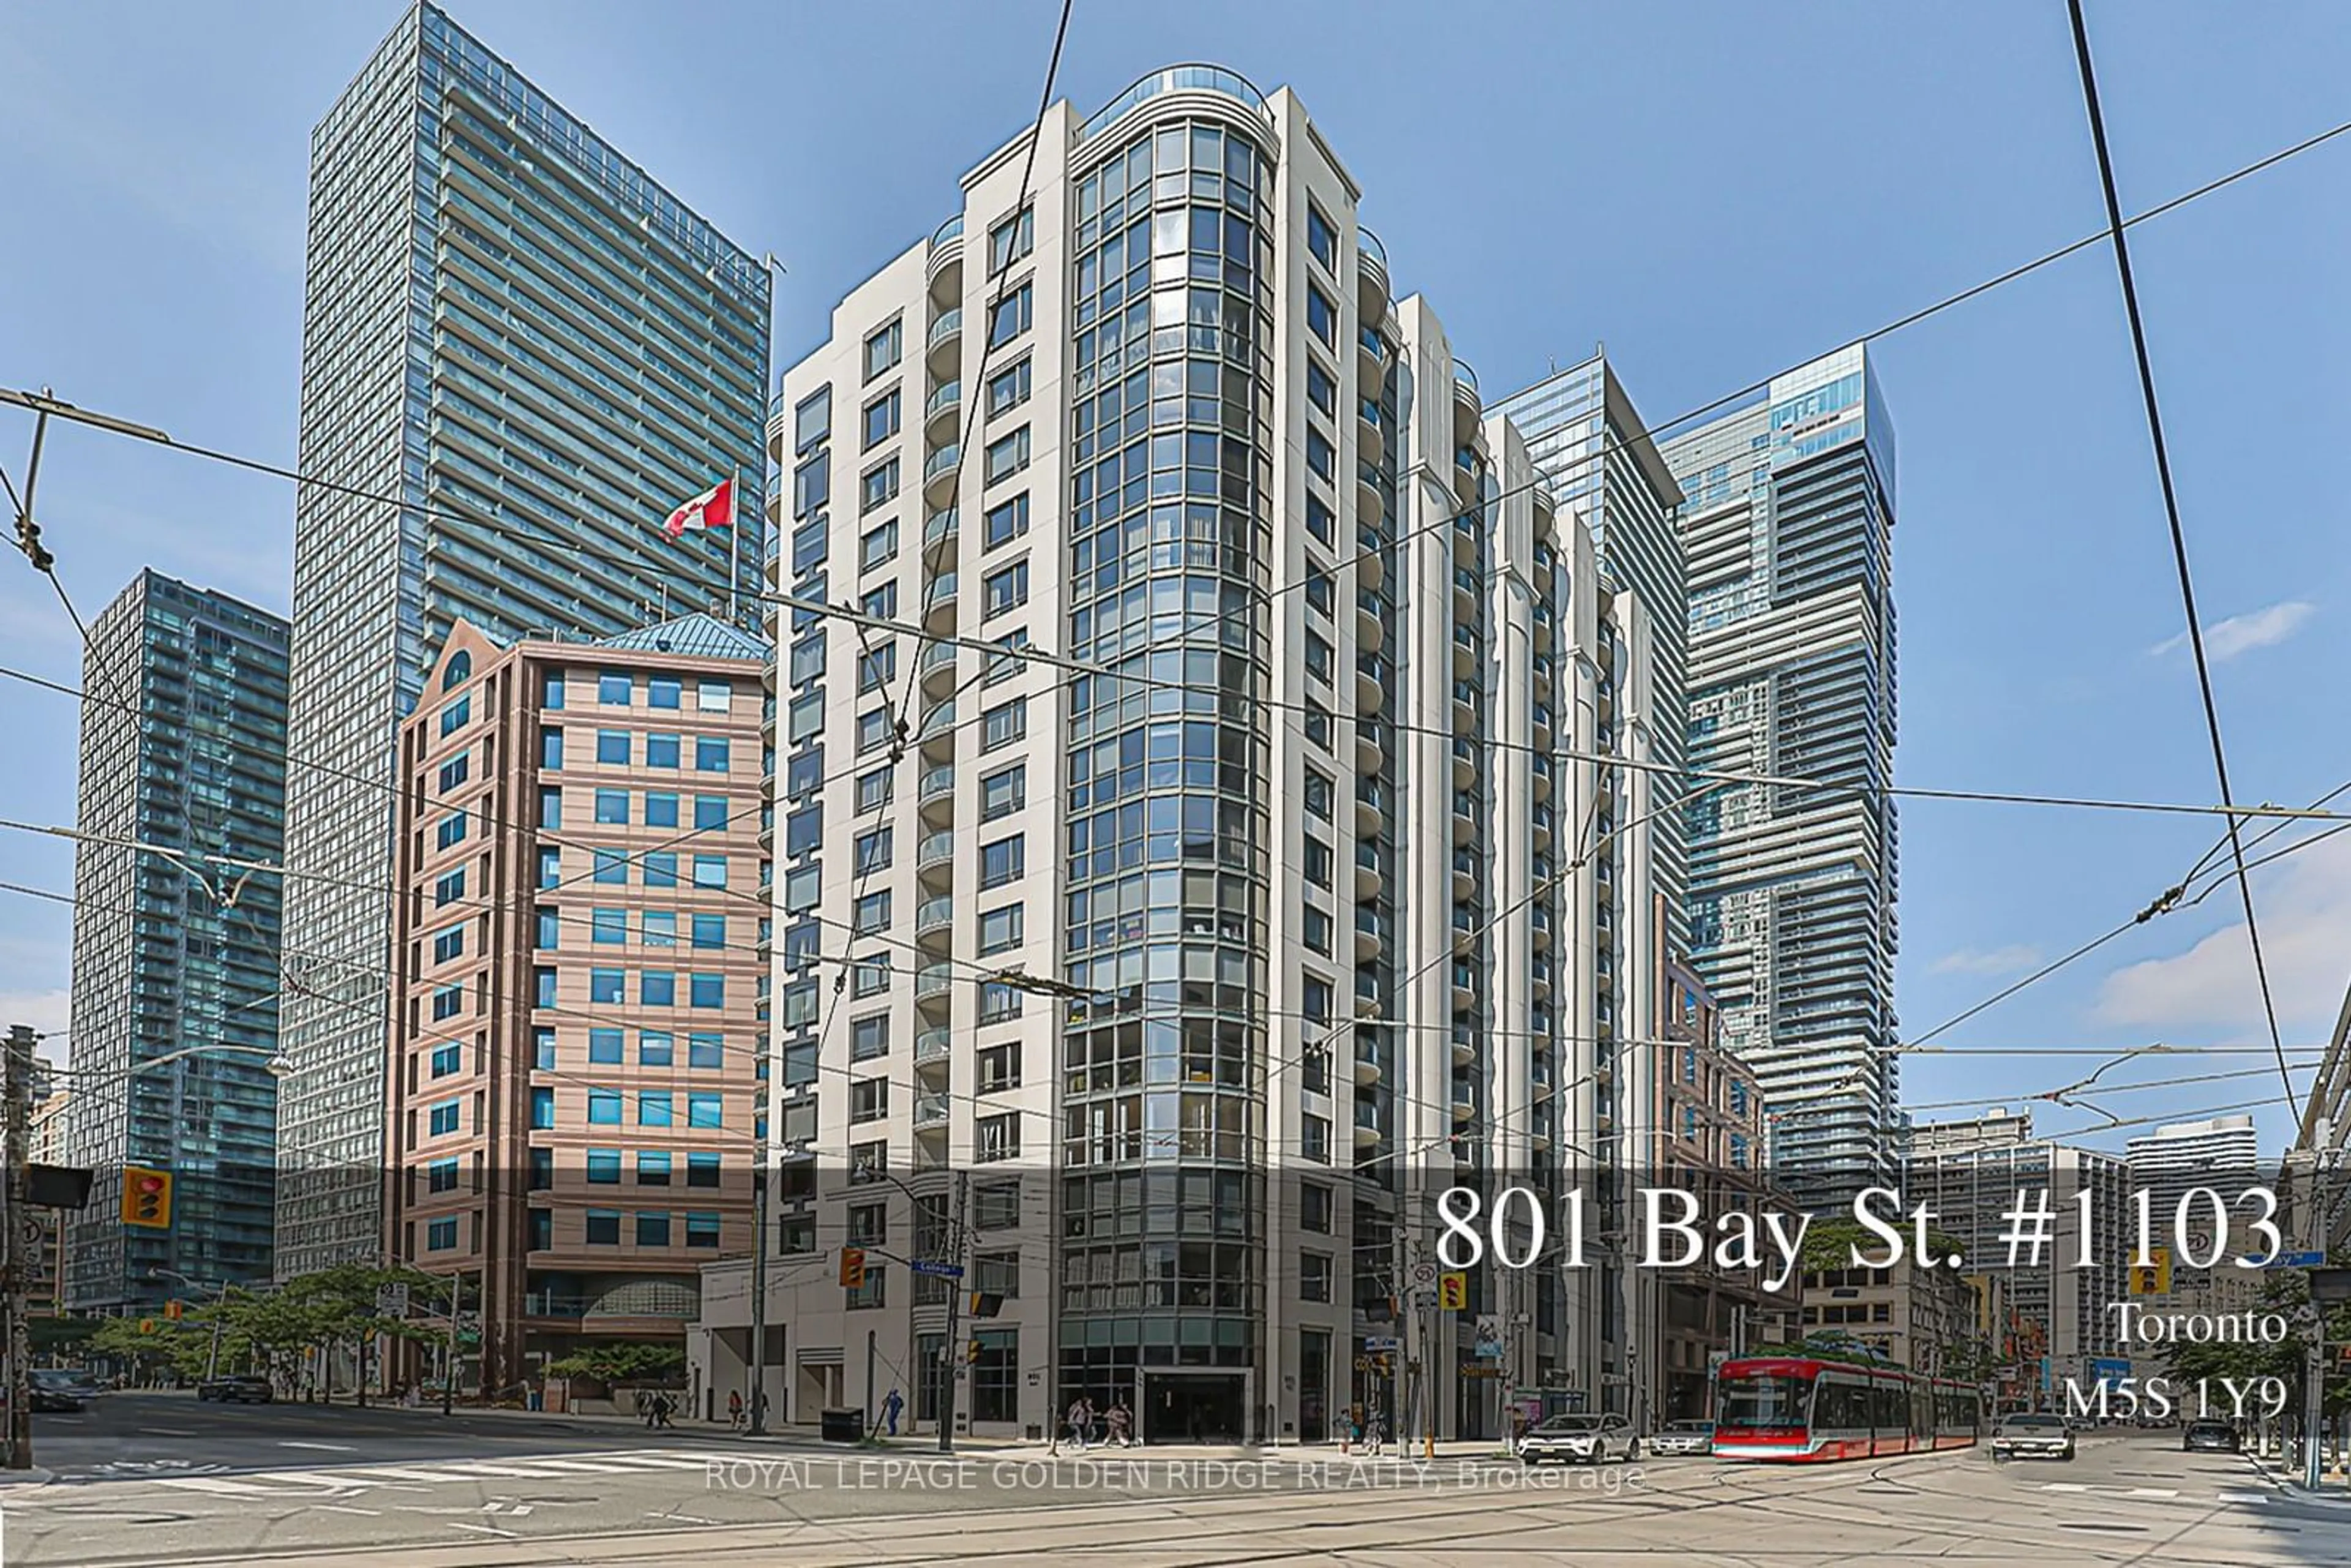 A pic from exterior of the house or condo for 801 Bay St #1103, Toronto Ontario M5S 1Y9